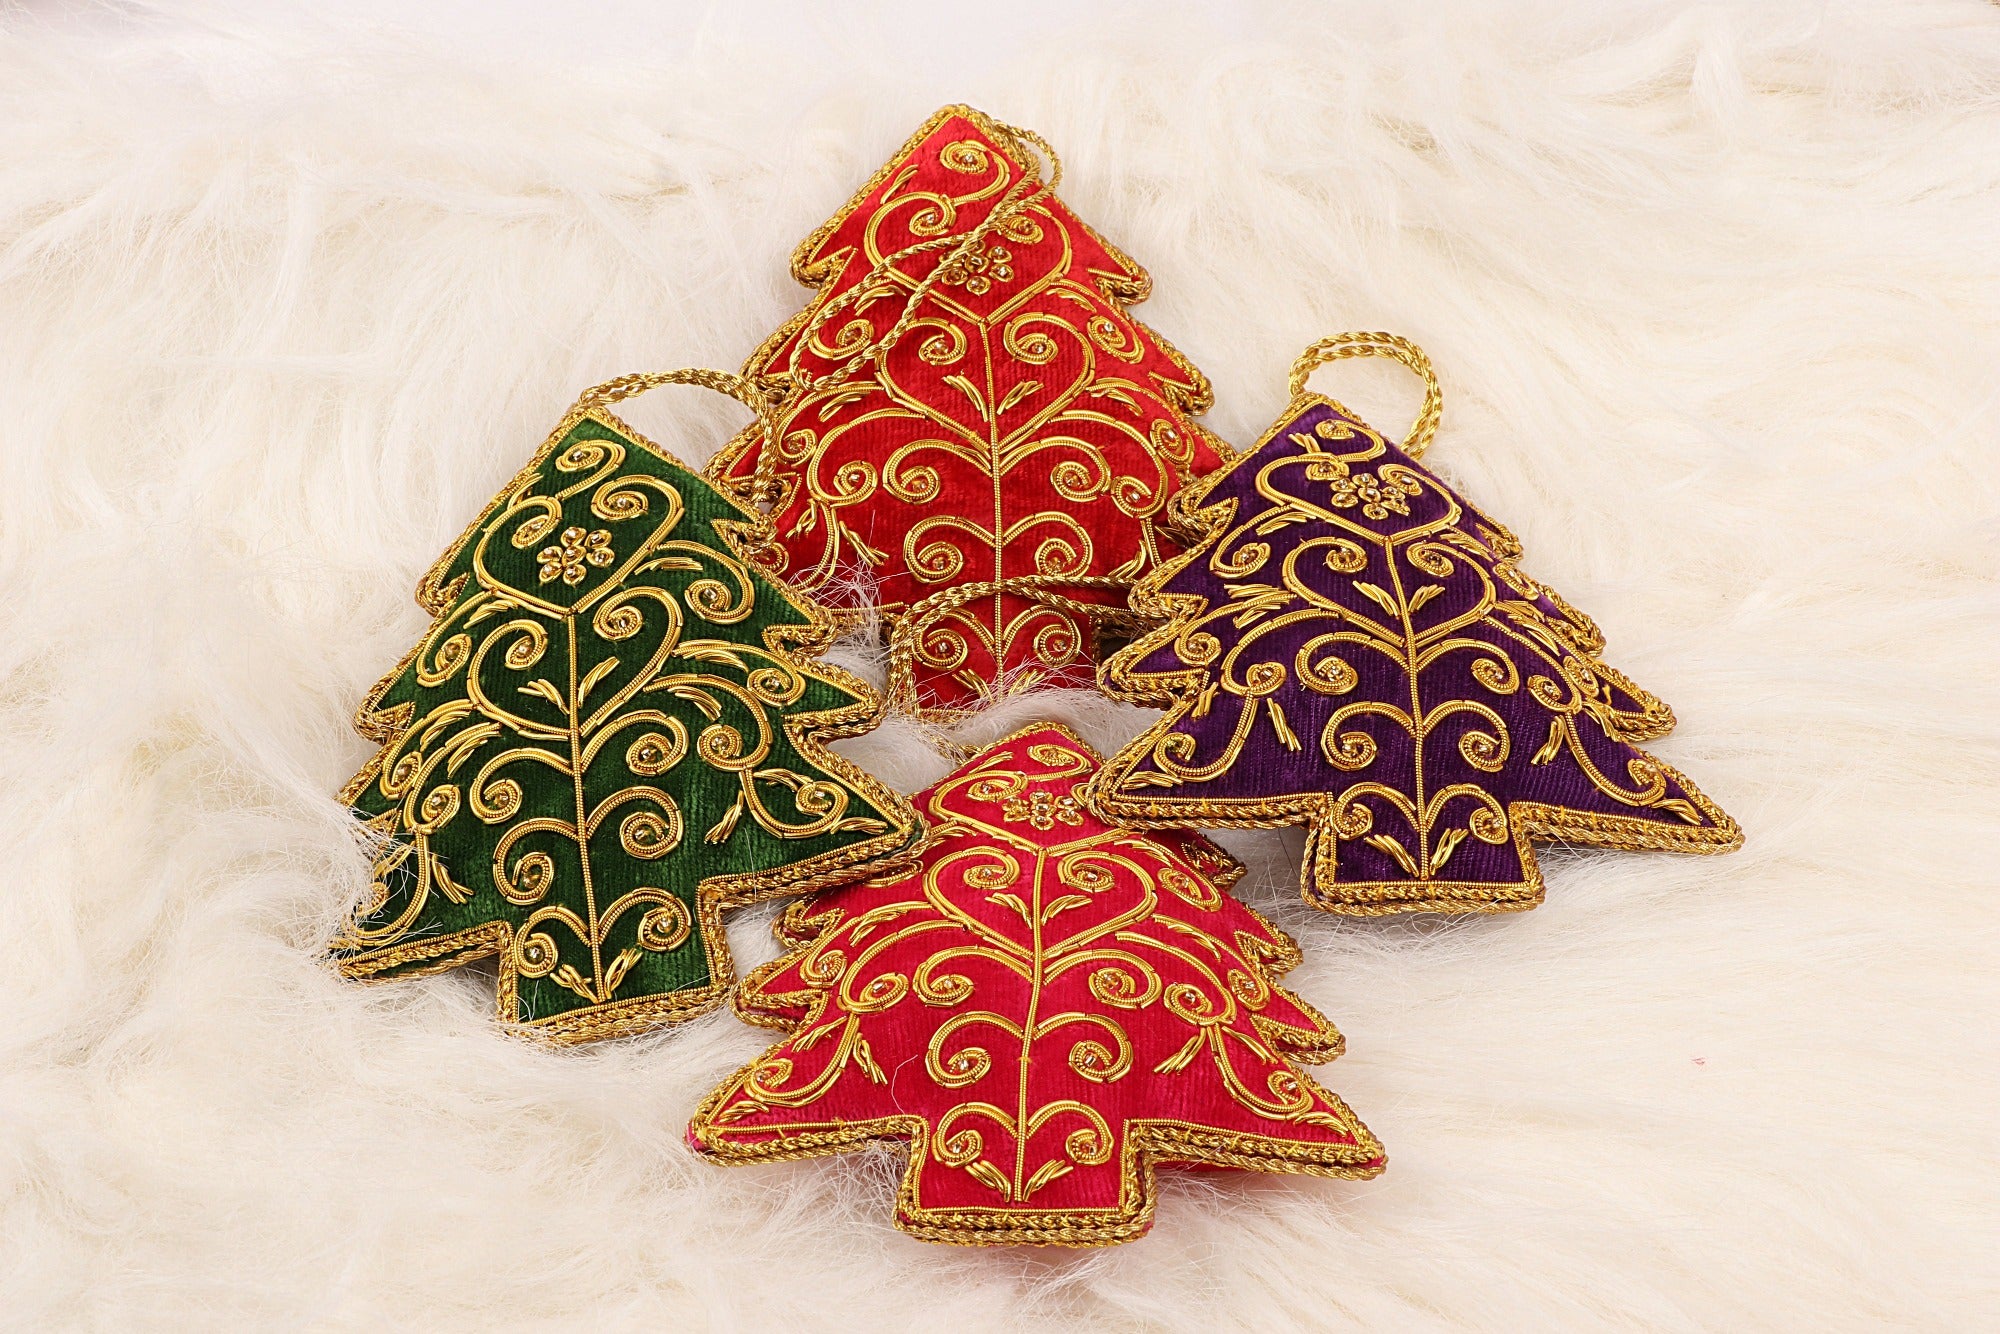 Decorative Tree Christmas ornaments set of 4 pieces for holiday decor (1SET=4PC)